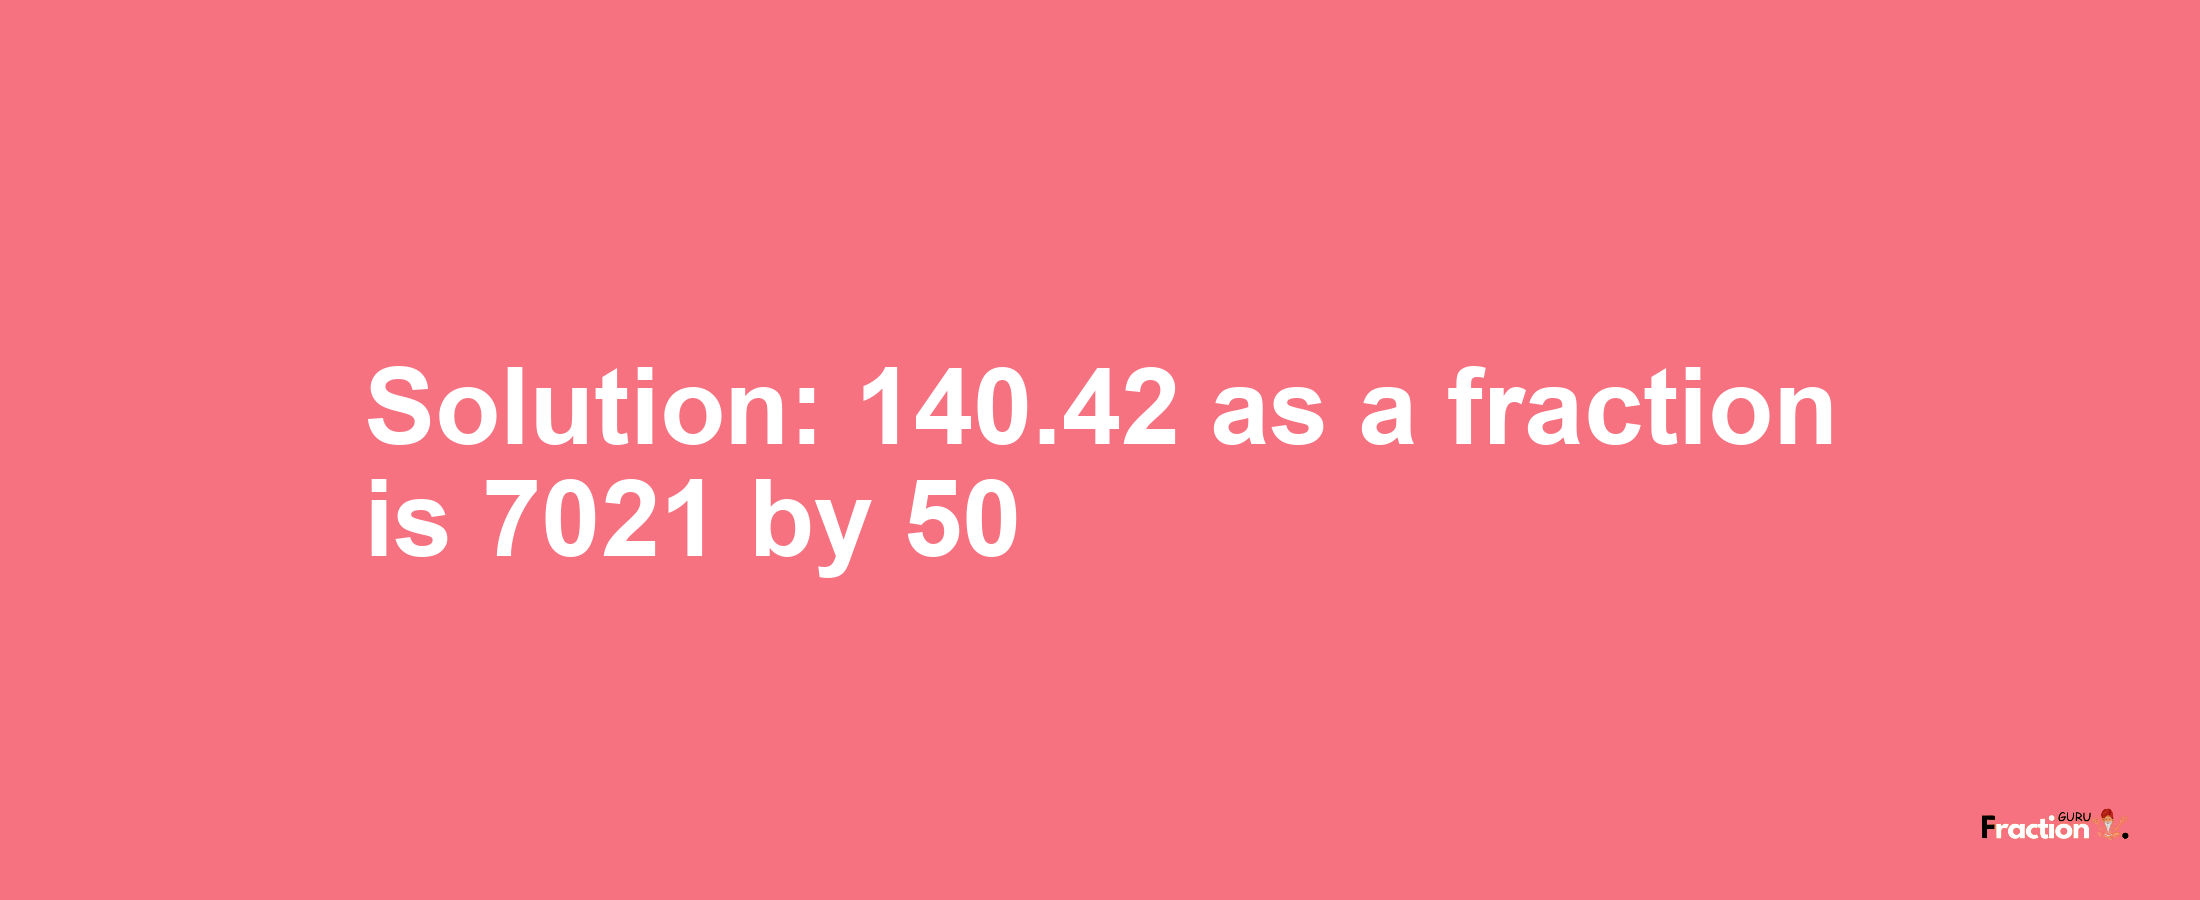 Solution:140.42 as a fraction is 7021/50